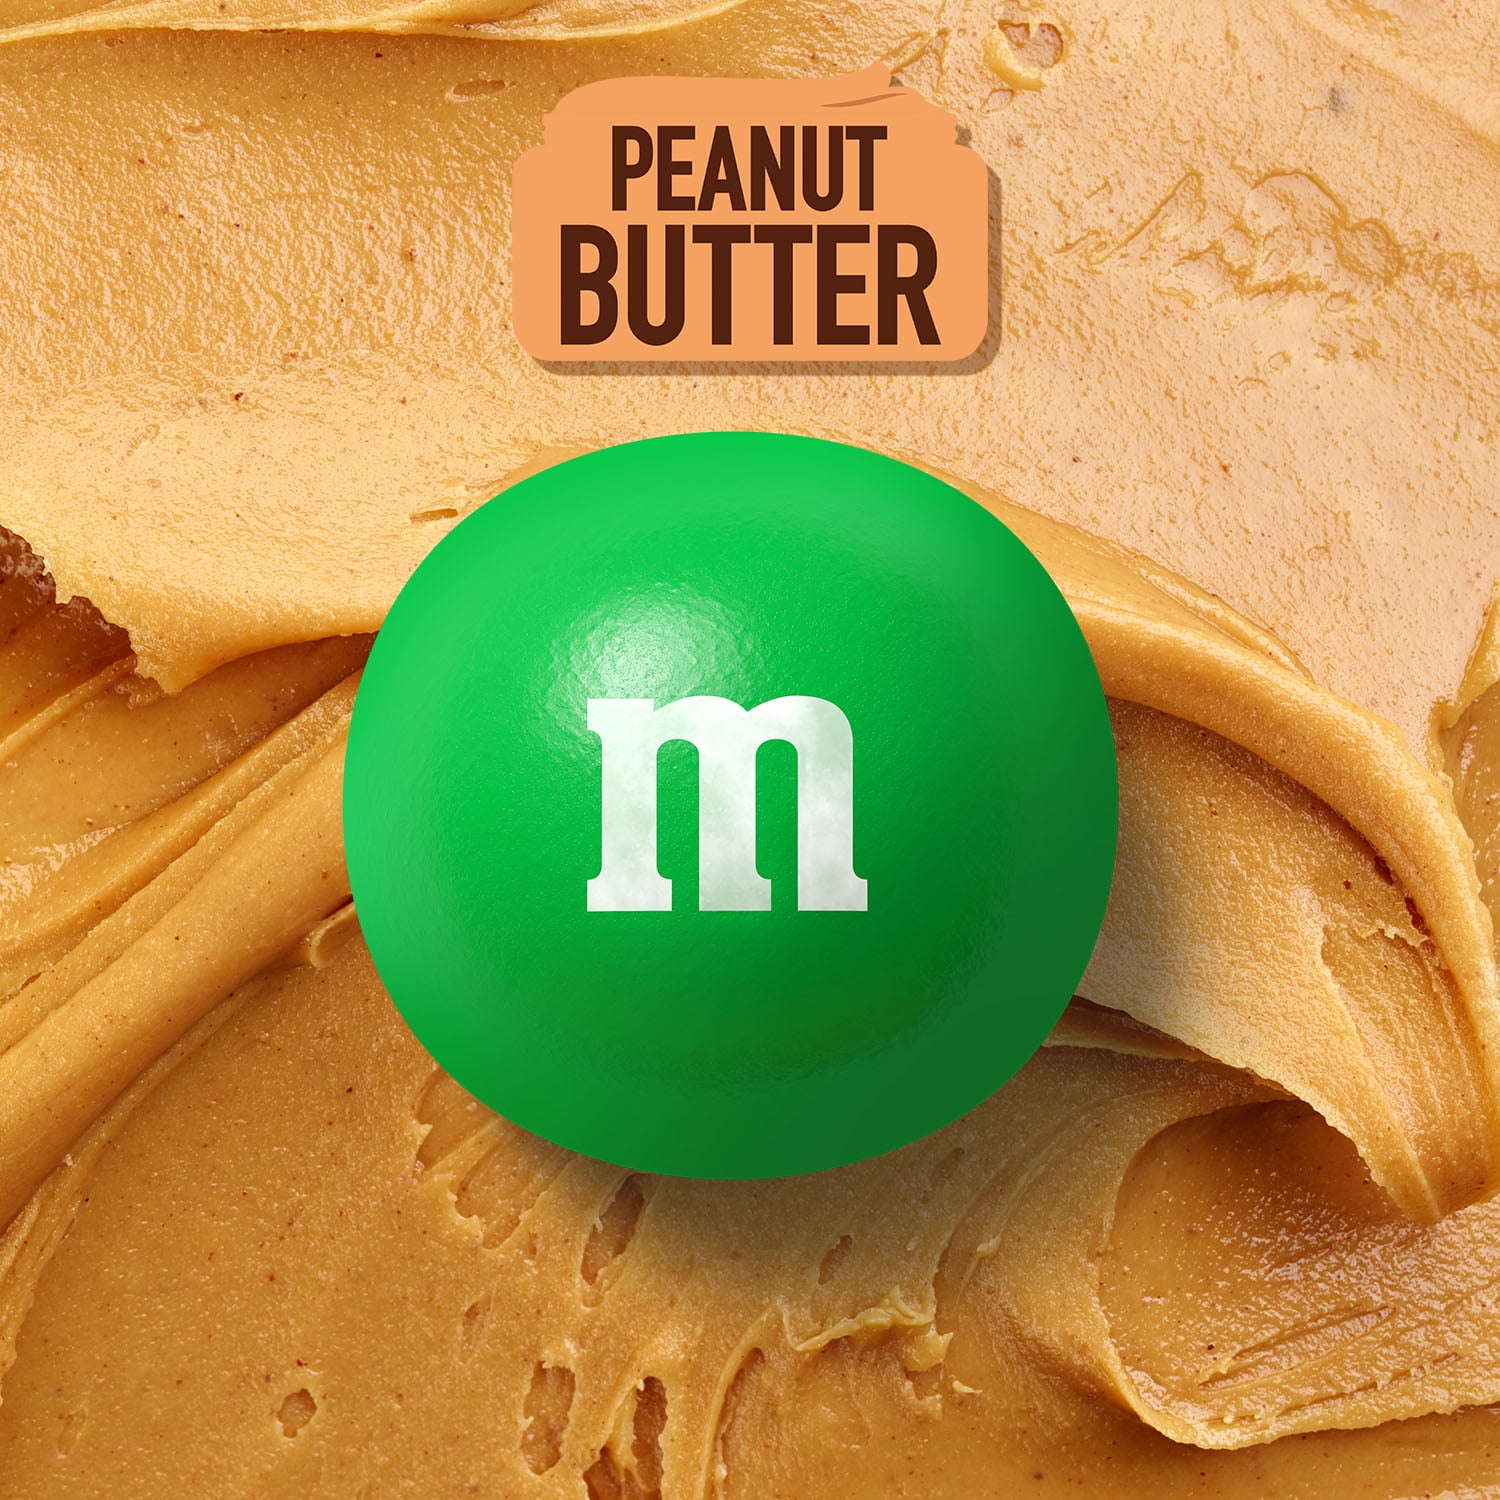 M&M's Peanut Butter 1.63 Oz. Candy - Power Townsend Company